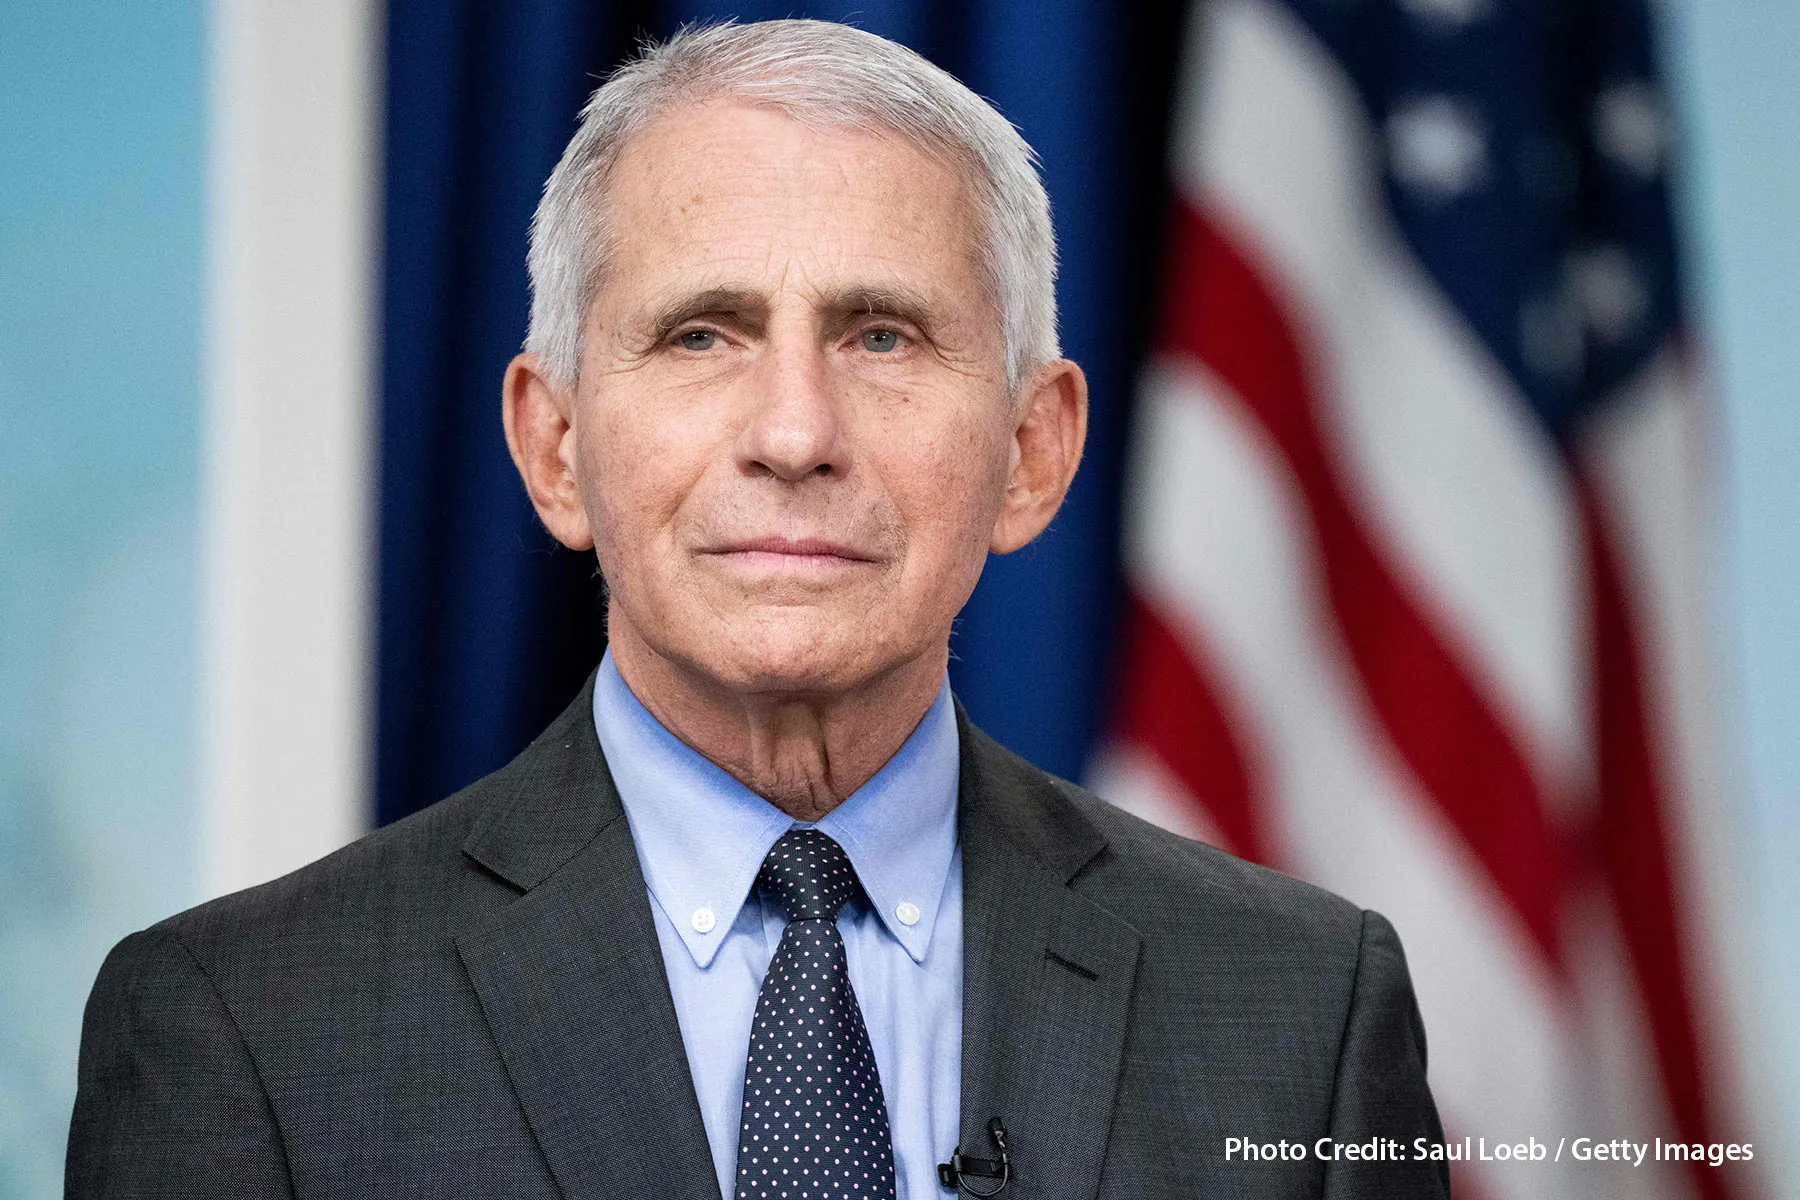 Fauci Q&A: On Masking, Vaccines, and What Keeps Him Up at Night